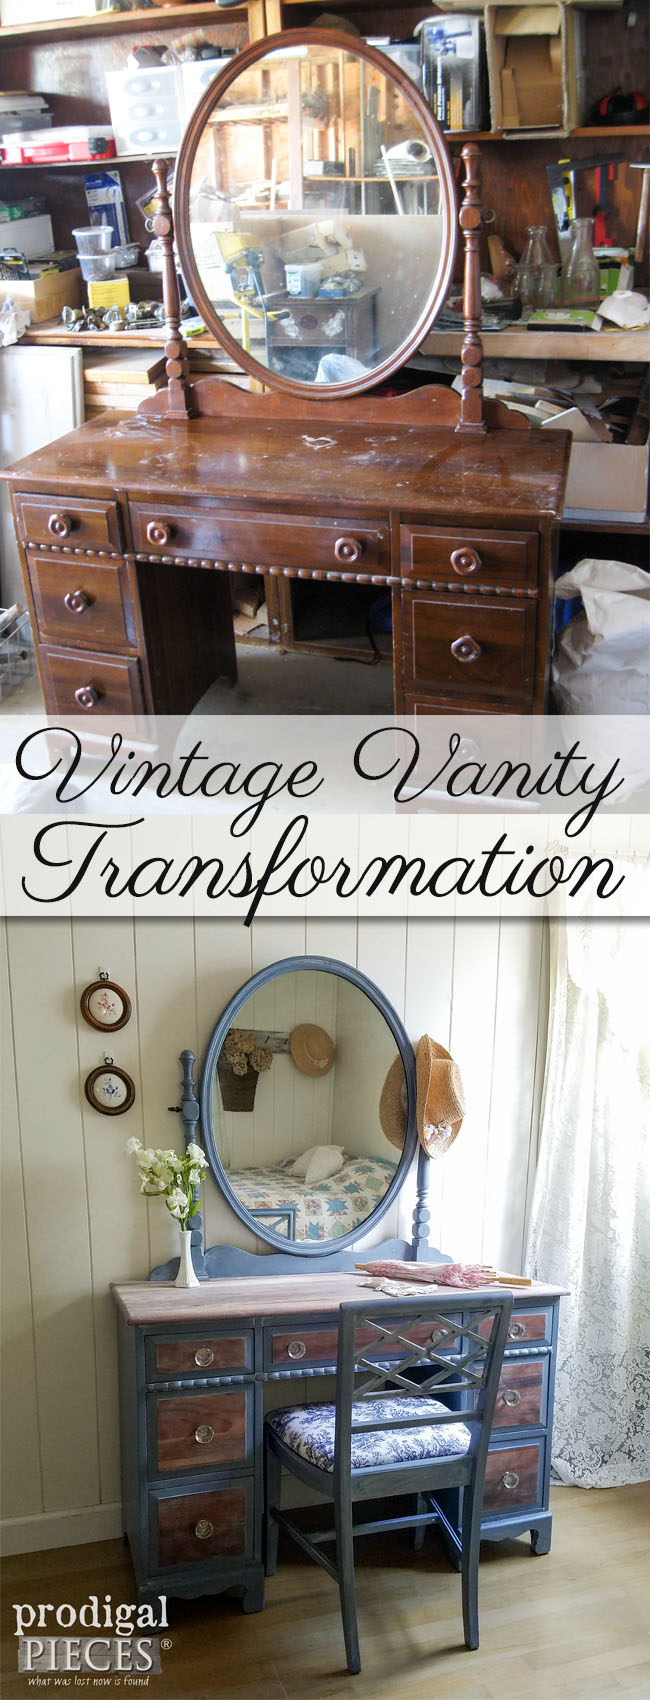 Vintage Kroehler Vanity Gets French Country Cottage Makeover by Prodigal Pieces | prodigalpieces.com